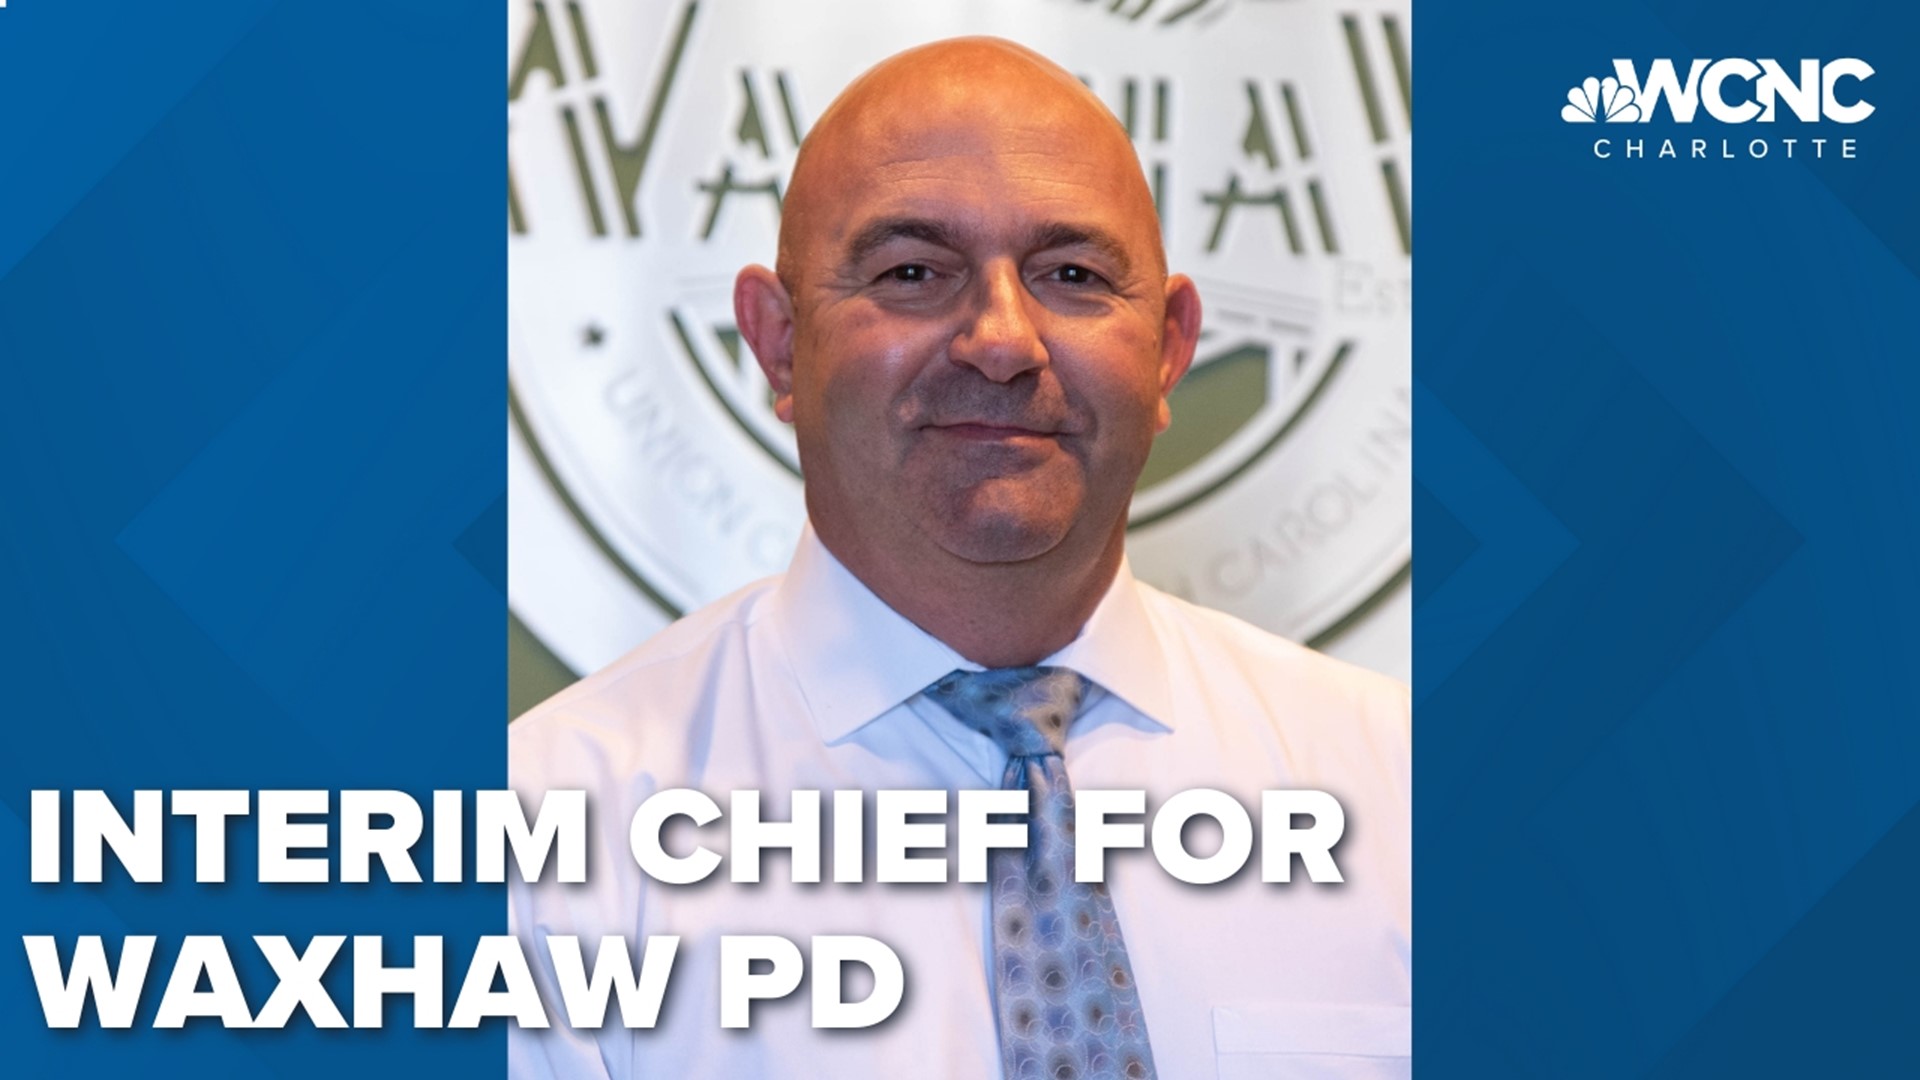 The town of Waxhaw reveals the name of its interim police chief.